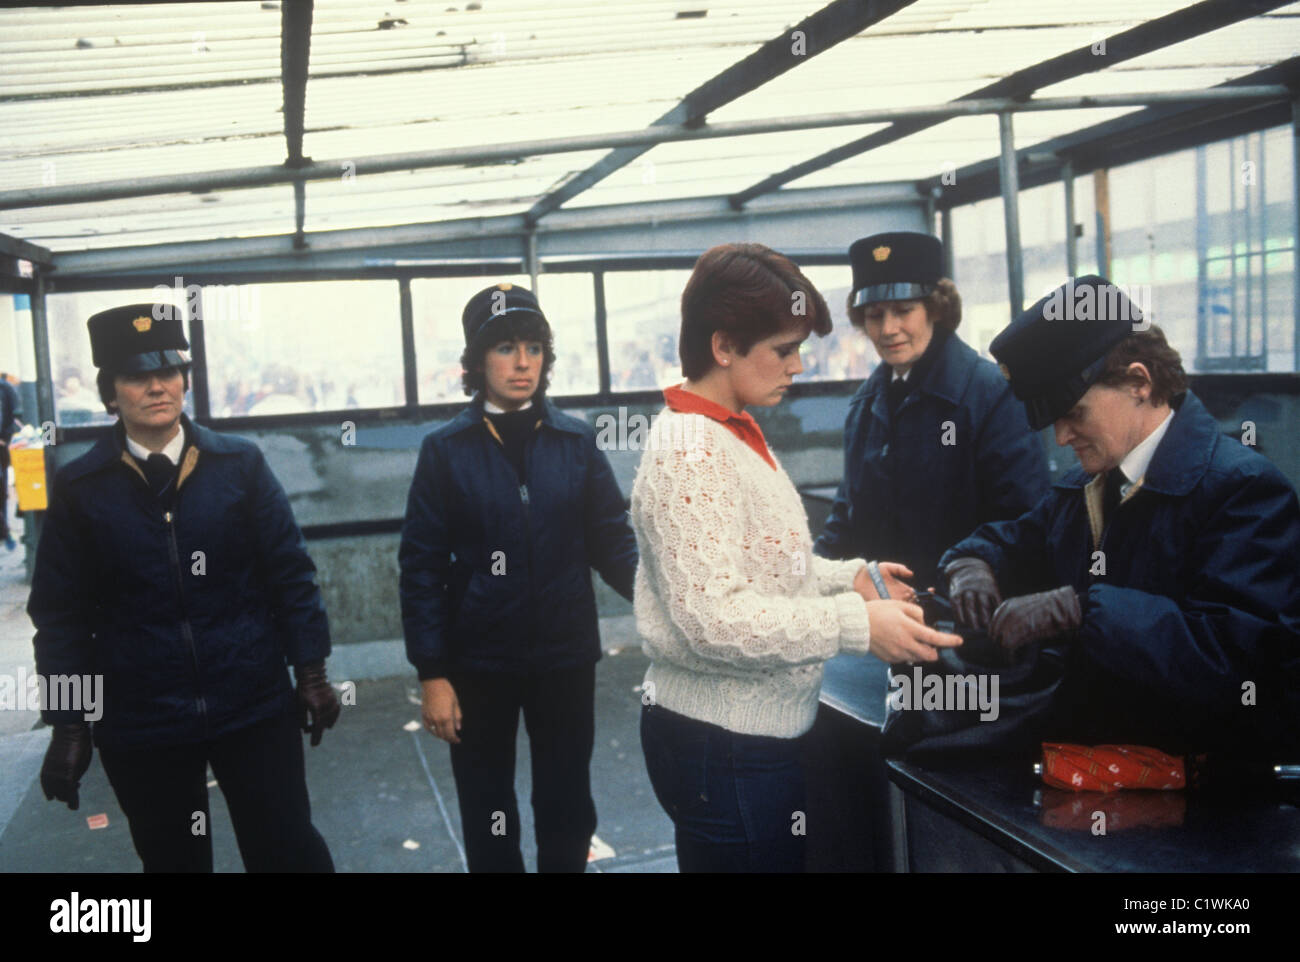 Northern Ireland The Troubles. 1980s. 1981, Female RUC policewomen search a shopper entering secure area of Belfast. 80s HOMER SYKES Stock Photo